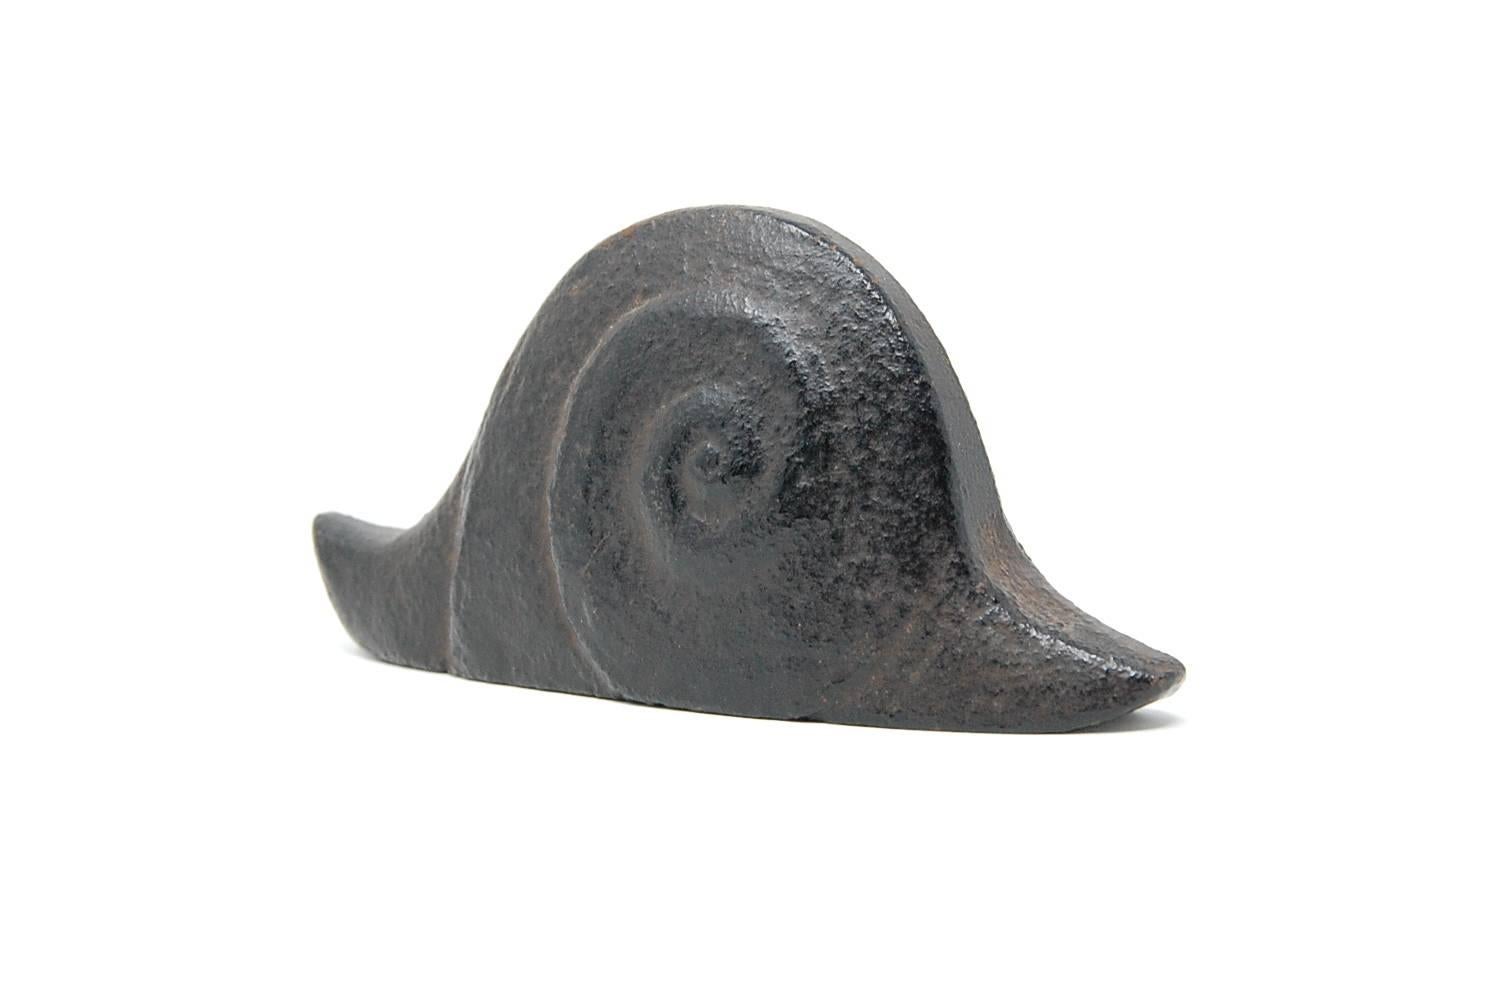 Anglo-Japanese Cast Iron Snail Sculpture